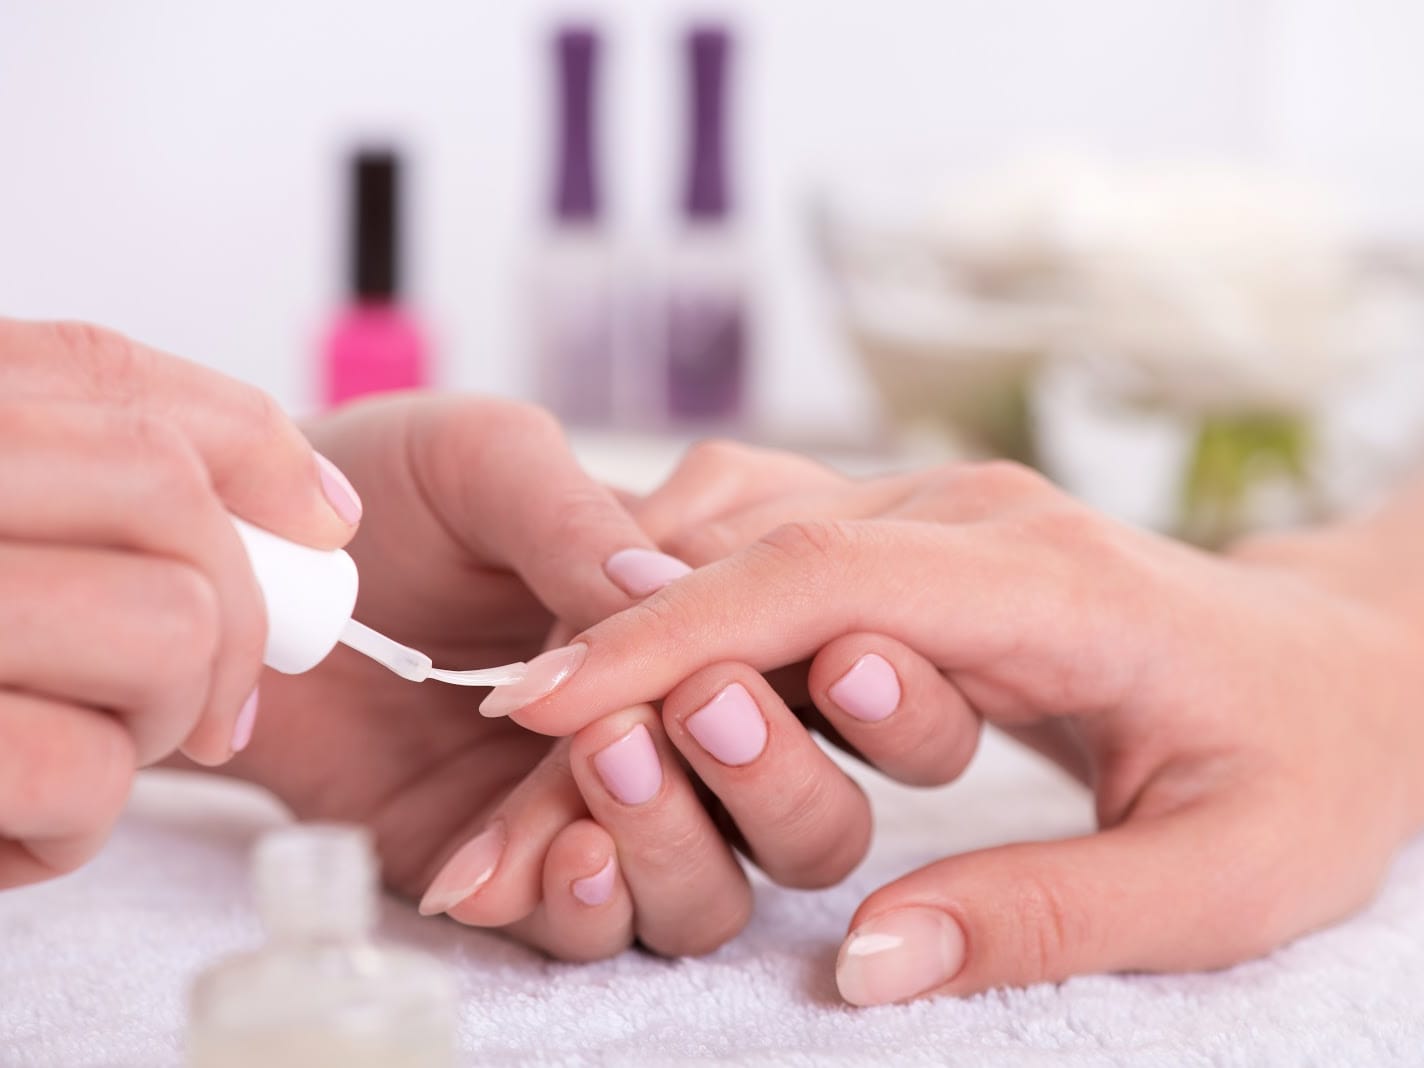 Classic Mani - Pedi for 1 Person at Le Posh Wellness - Get Deals, Cashback and Rewards with ShopBack GO